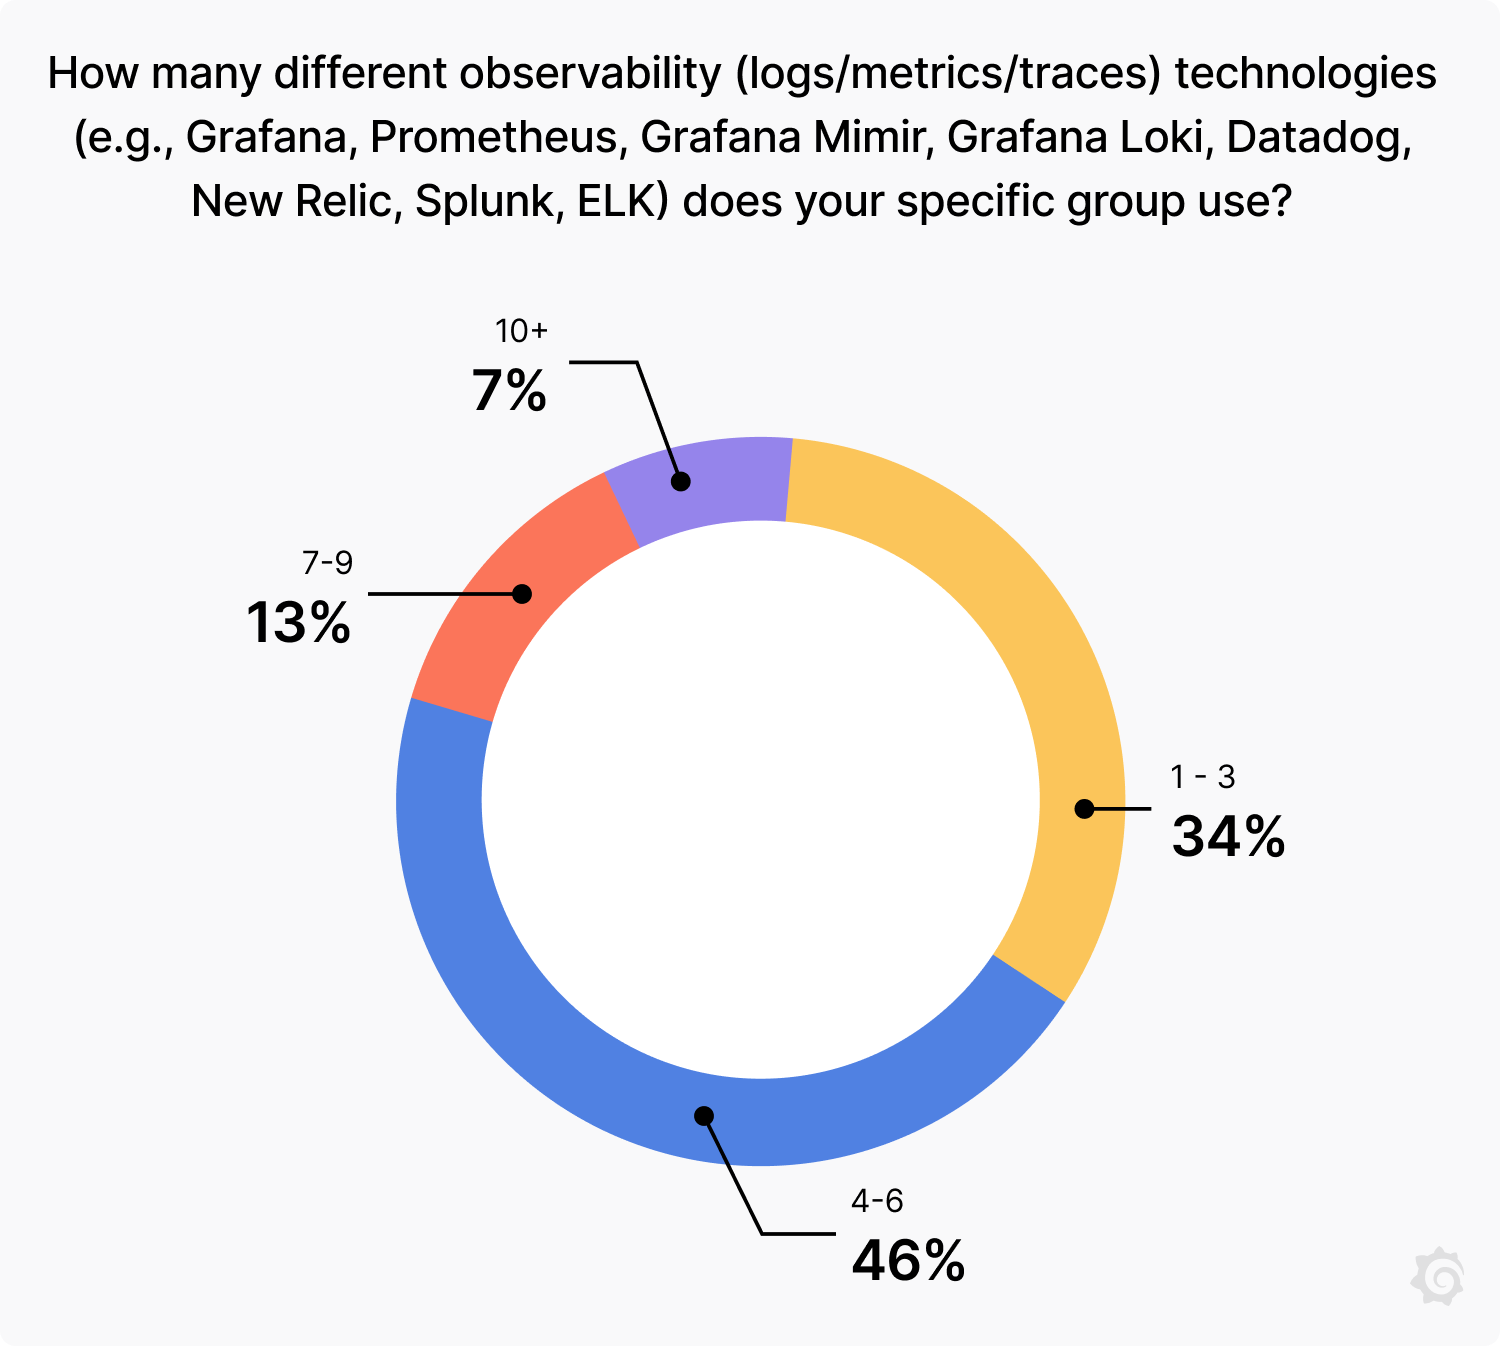 how many technologies does your group use